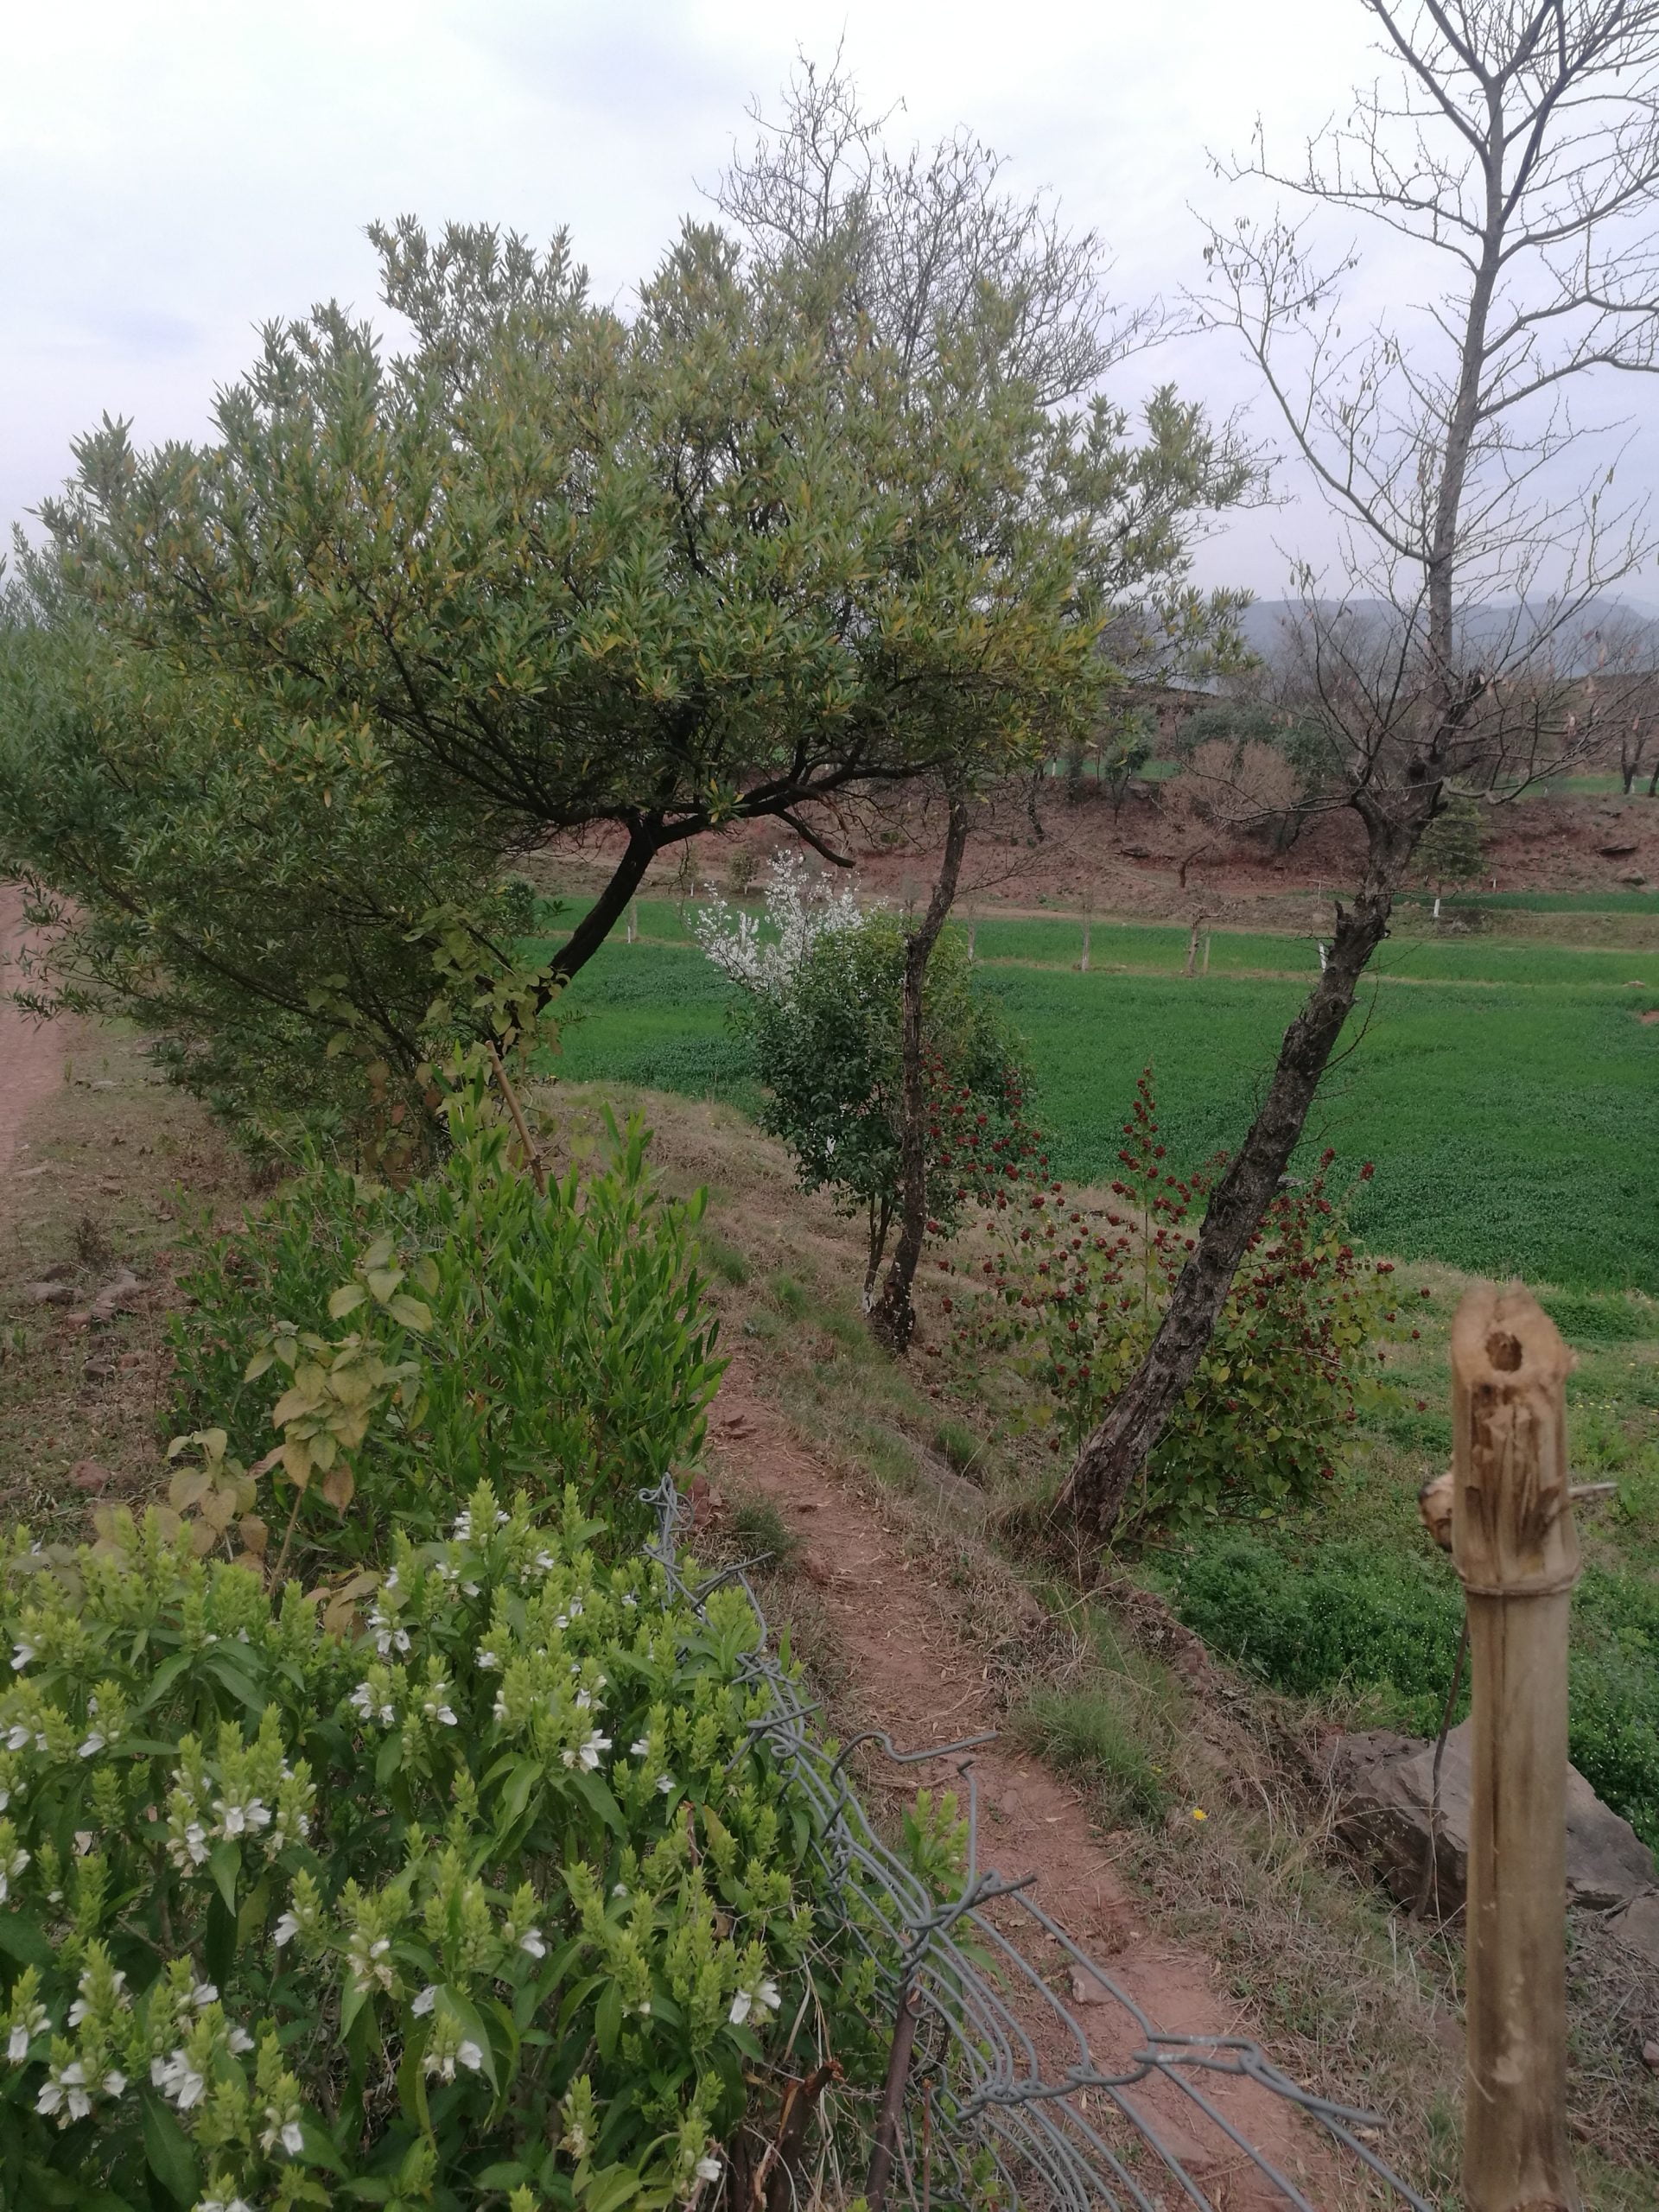 10 Kanal Land For Farm House in Pkr 3 crore On Simli Dam Road Near Naval Farms and Bahria Enclave Islamabad For sale